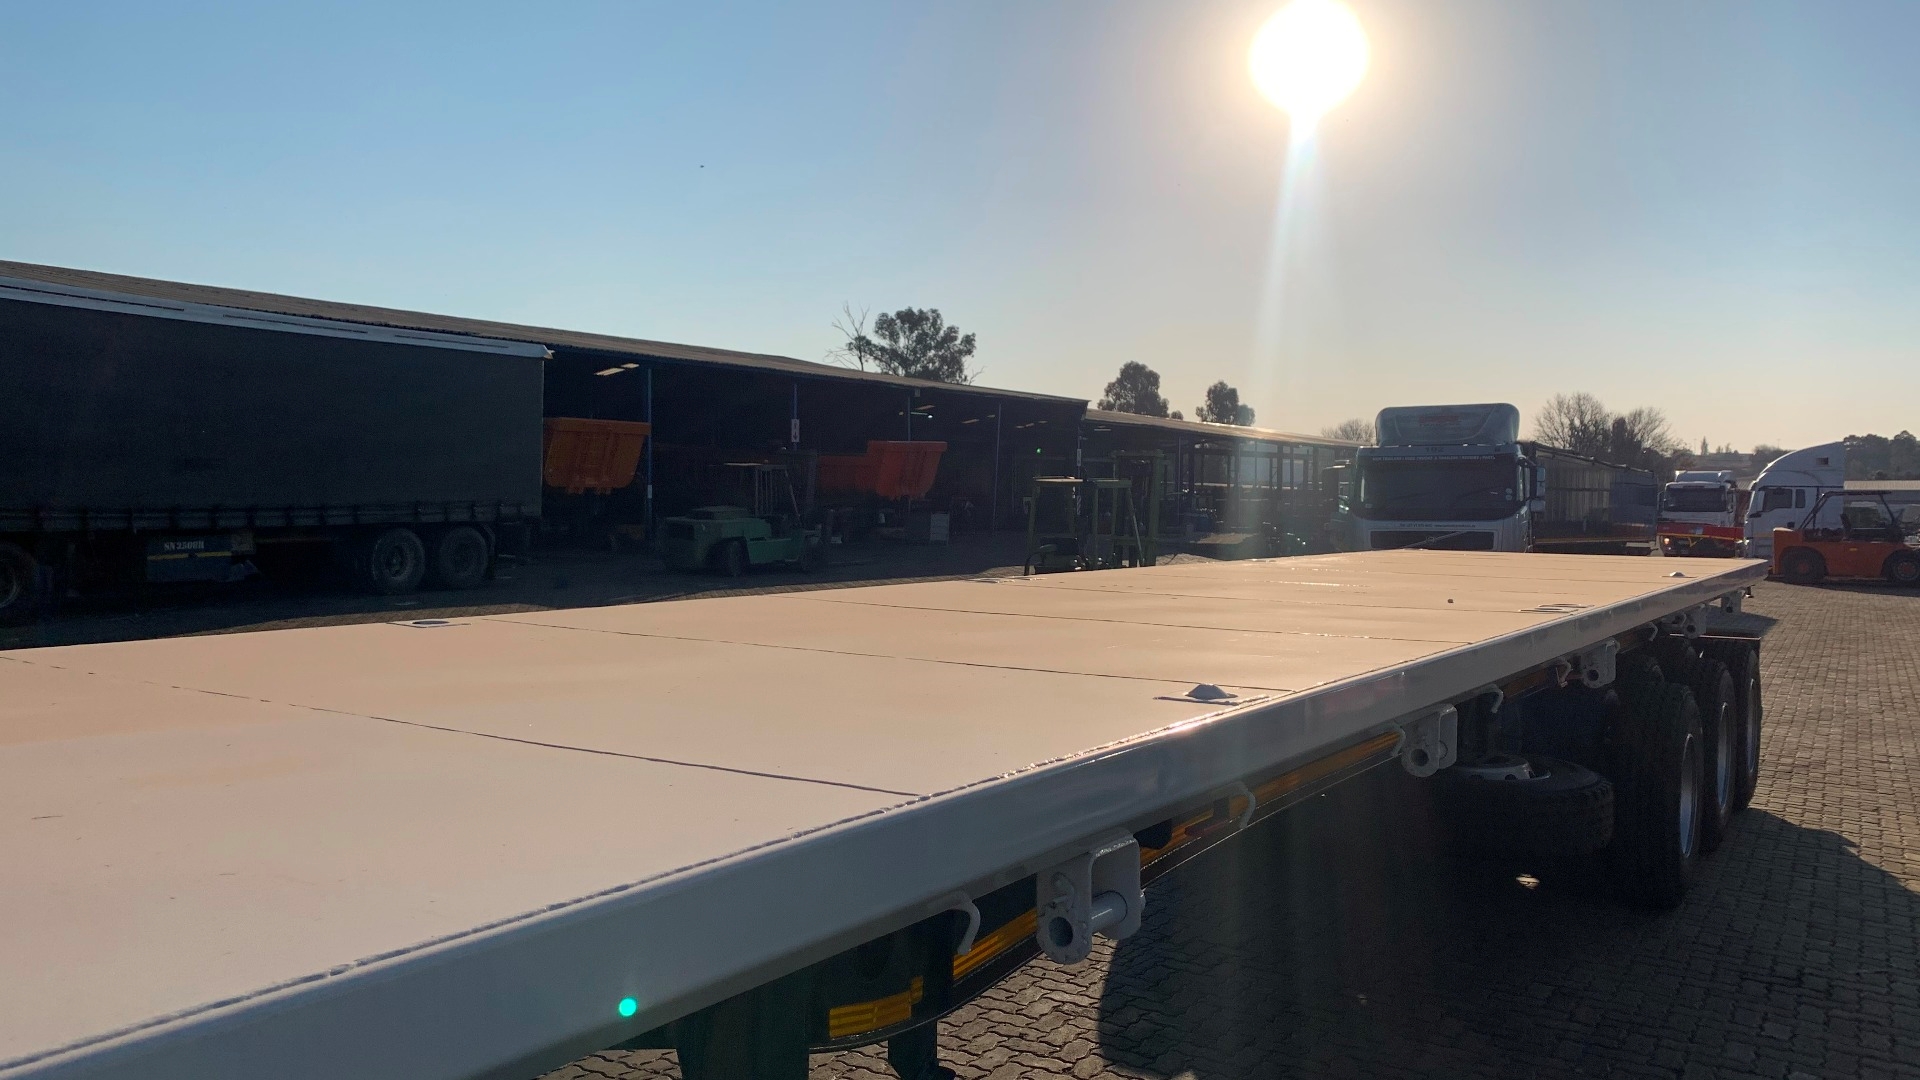 PR Trailers Trailers Flat deck TRI AXLE FLAT DECK for sale by Pomona Road Truck Sales | Truck & Trailer Marketplaces